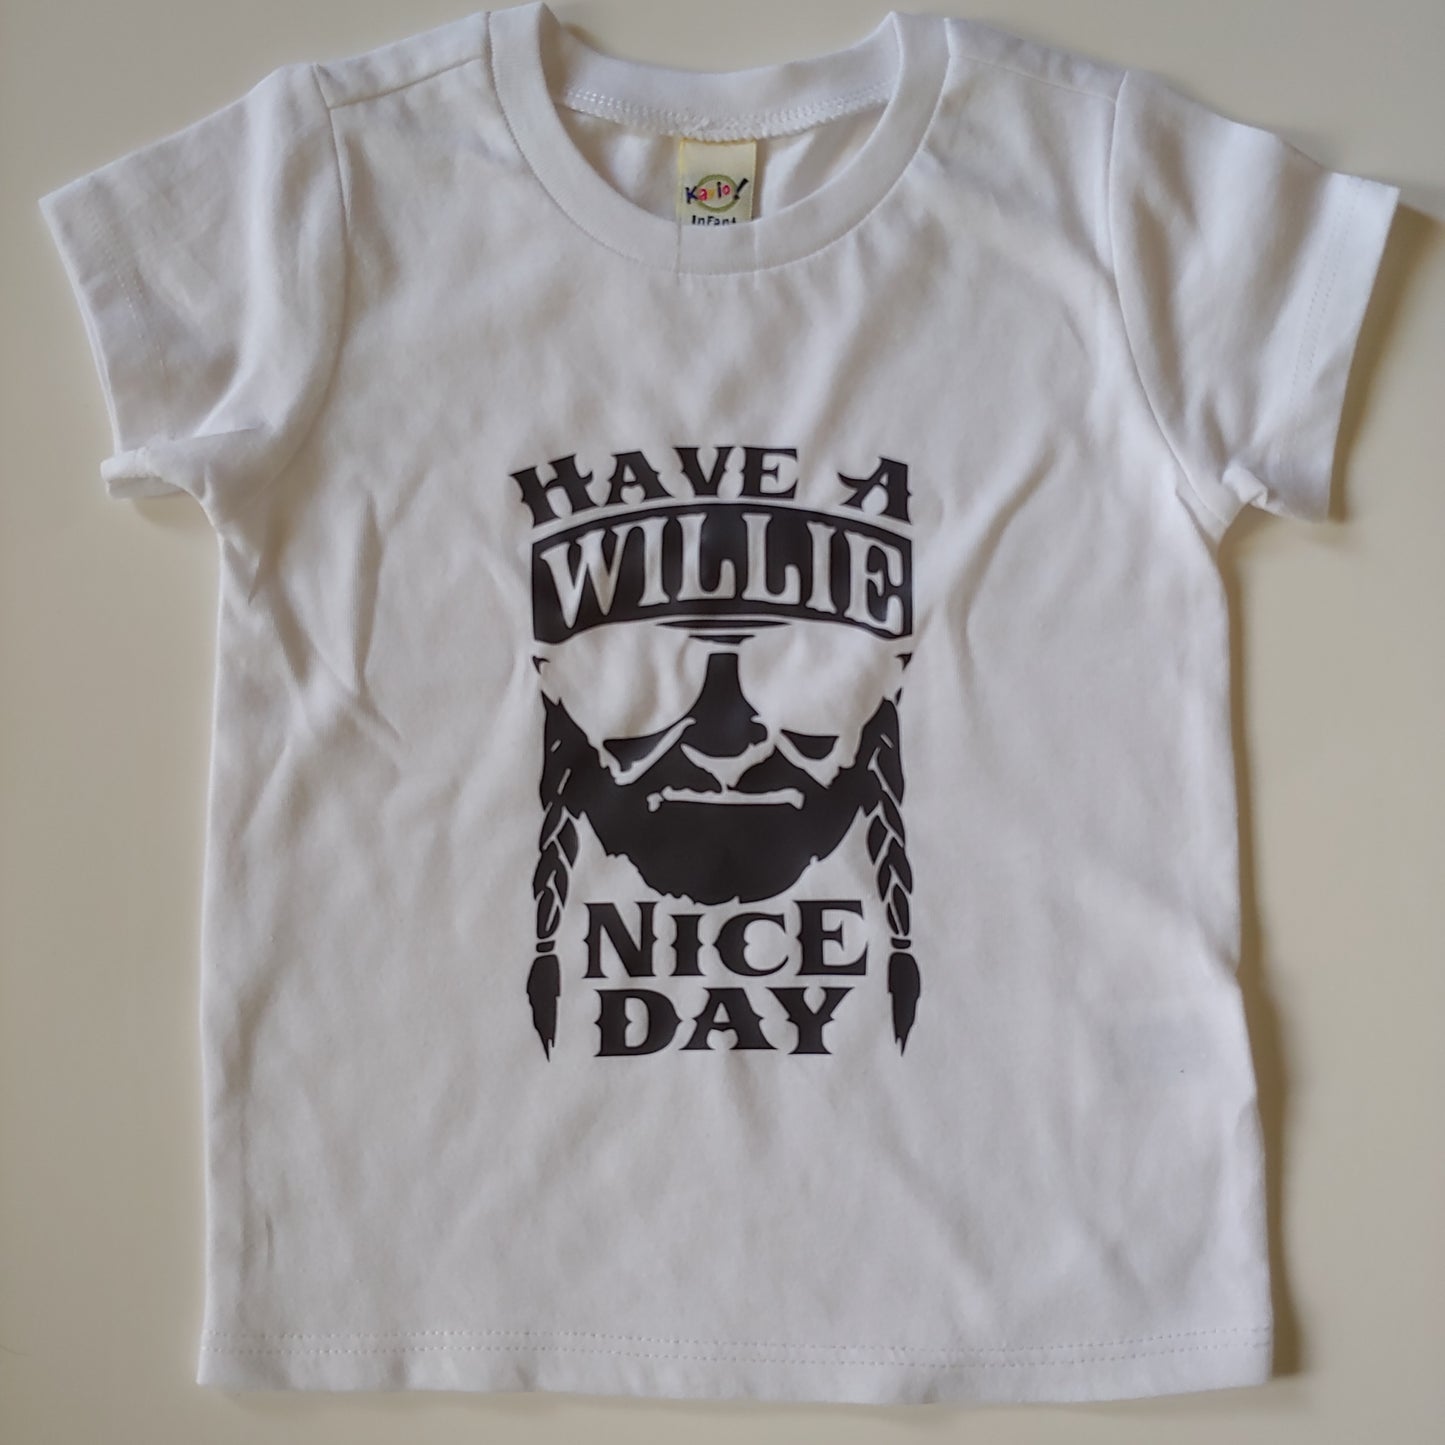 Have A Willie Nice Day,  Kids and Adult Tees